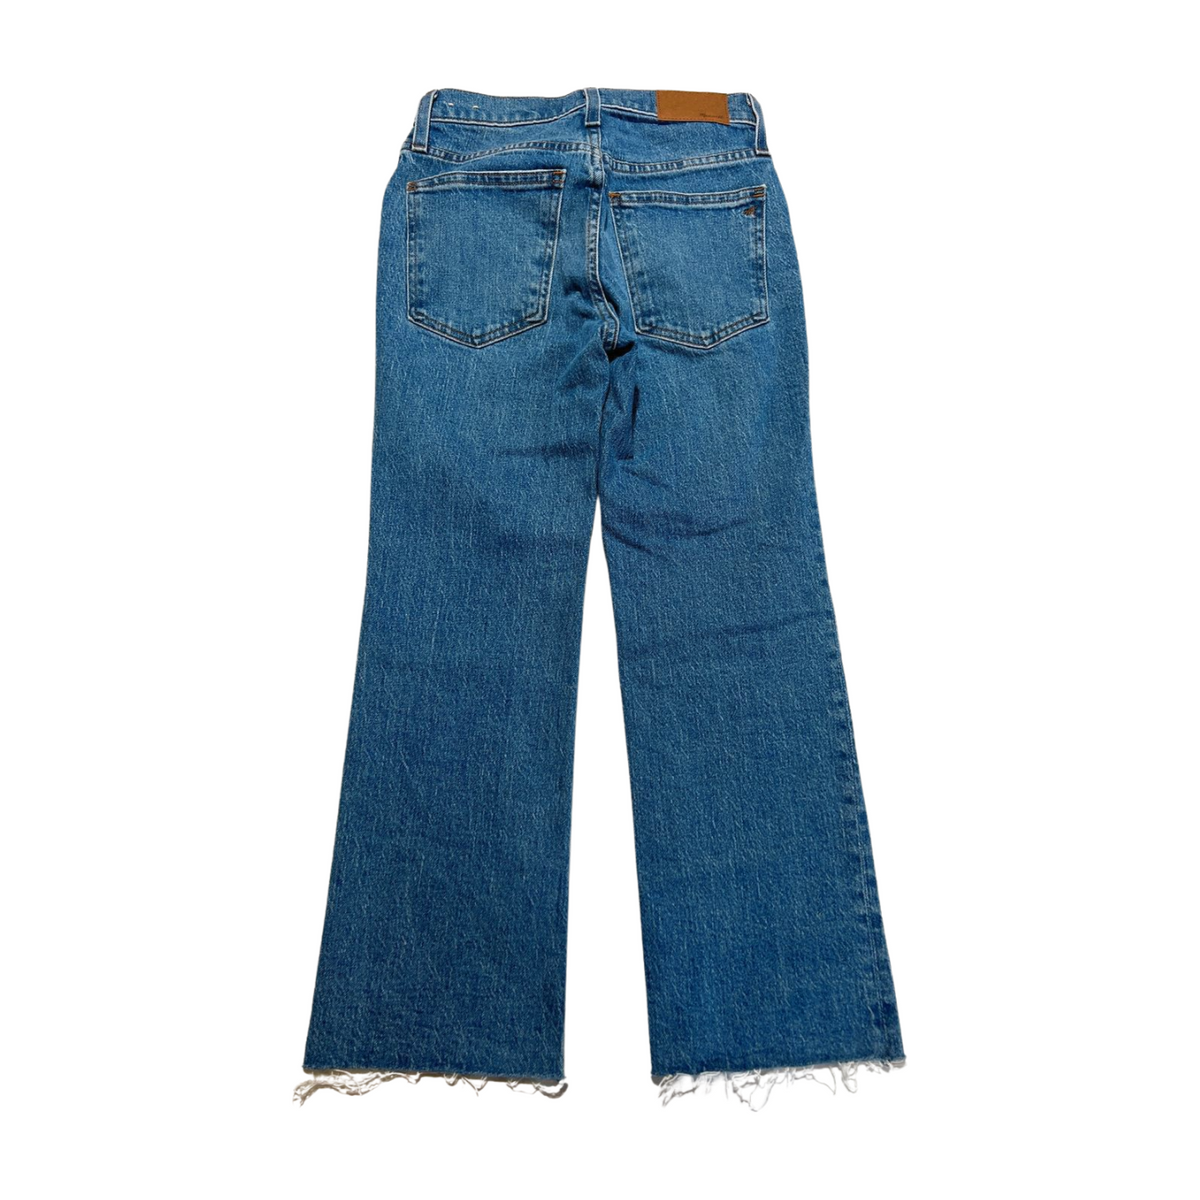 Madewell- "Cali Demi Boot" Jeans NEW WITH TAGS!